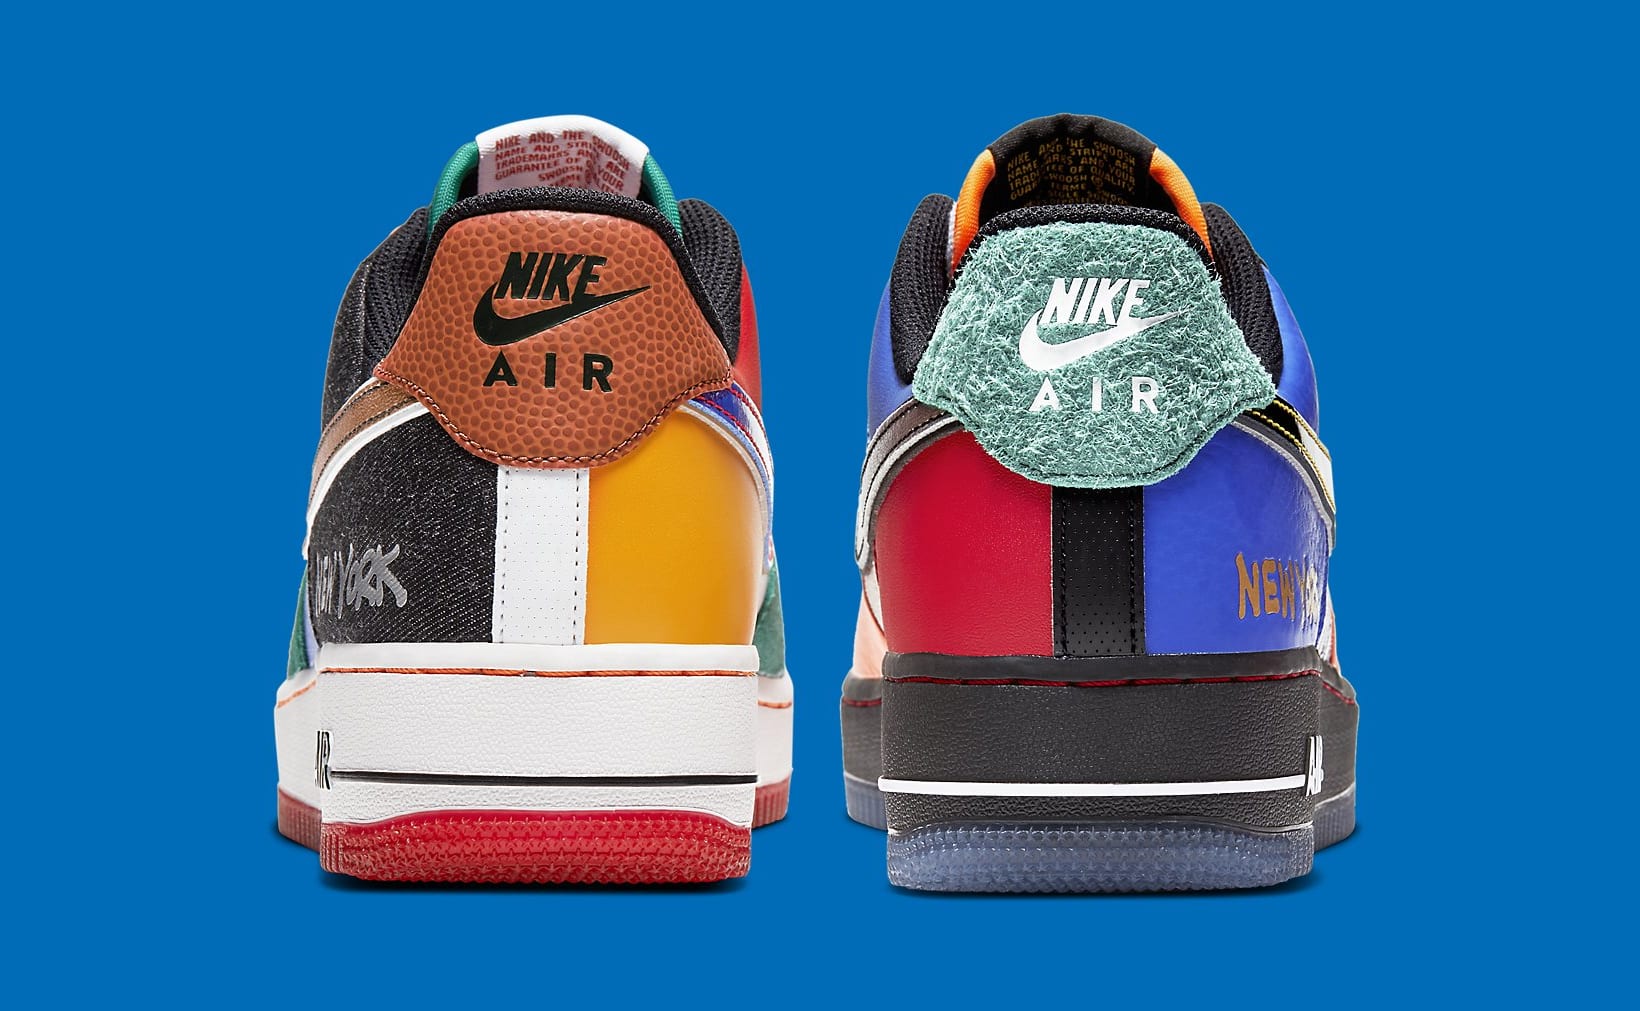 Nike Air Force 1 Low ‘07 LV8 What The NYC New York City of Athletes CT3610  100